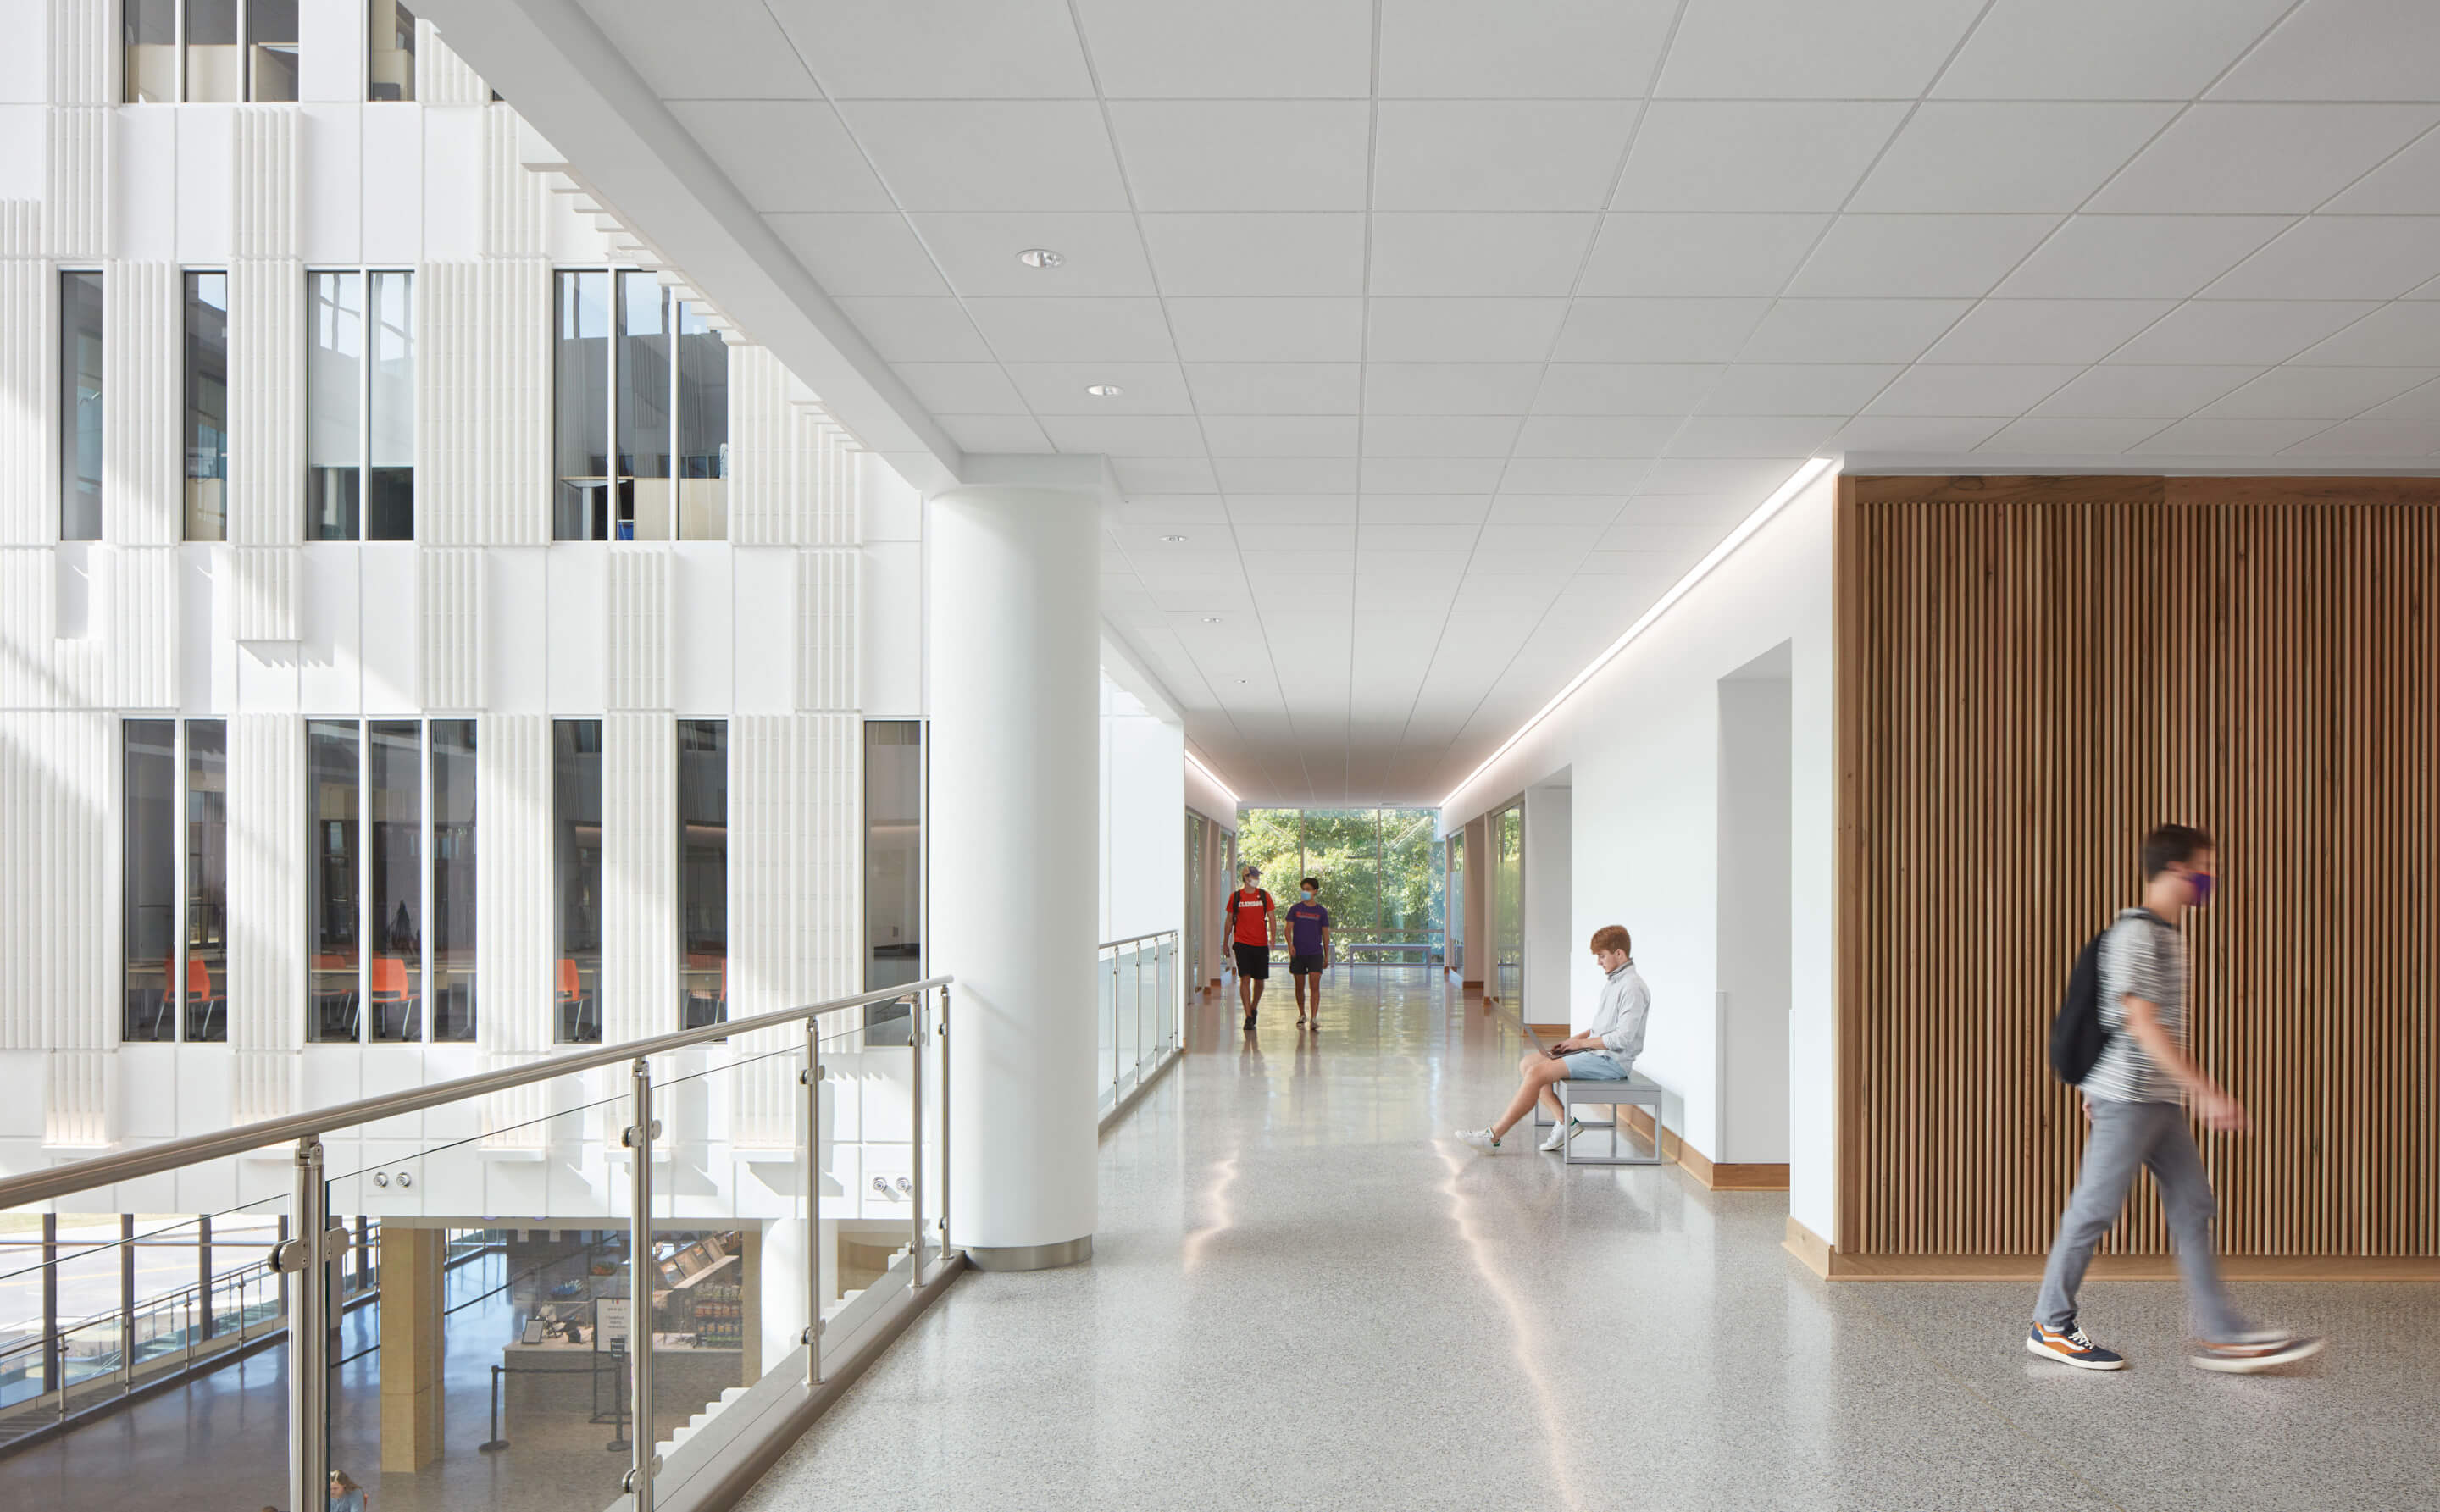 students walk down an open corridor in an airy academic building